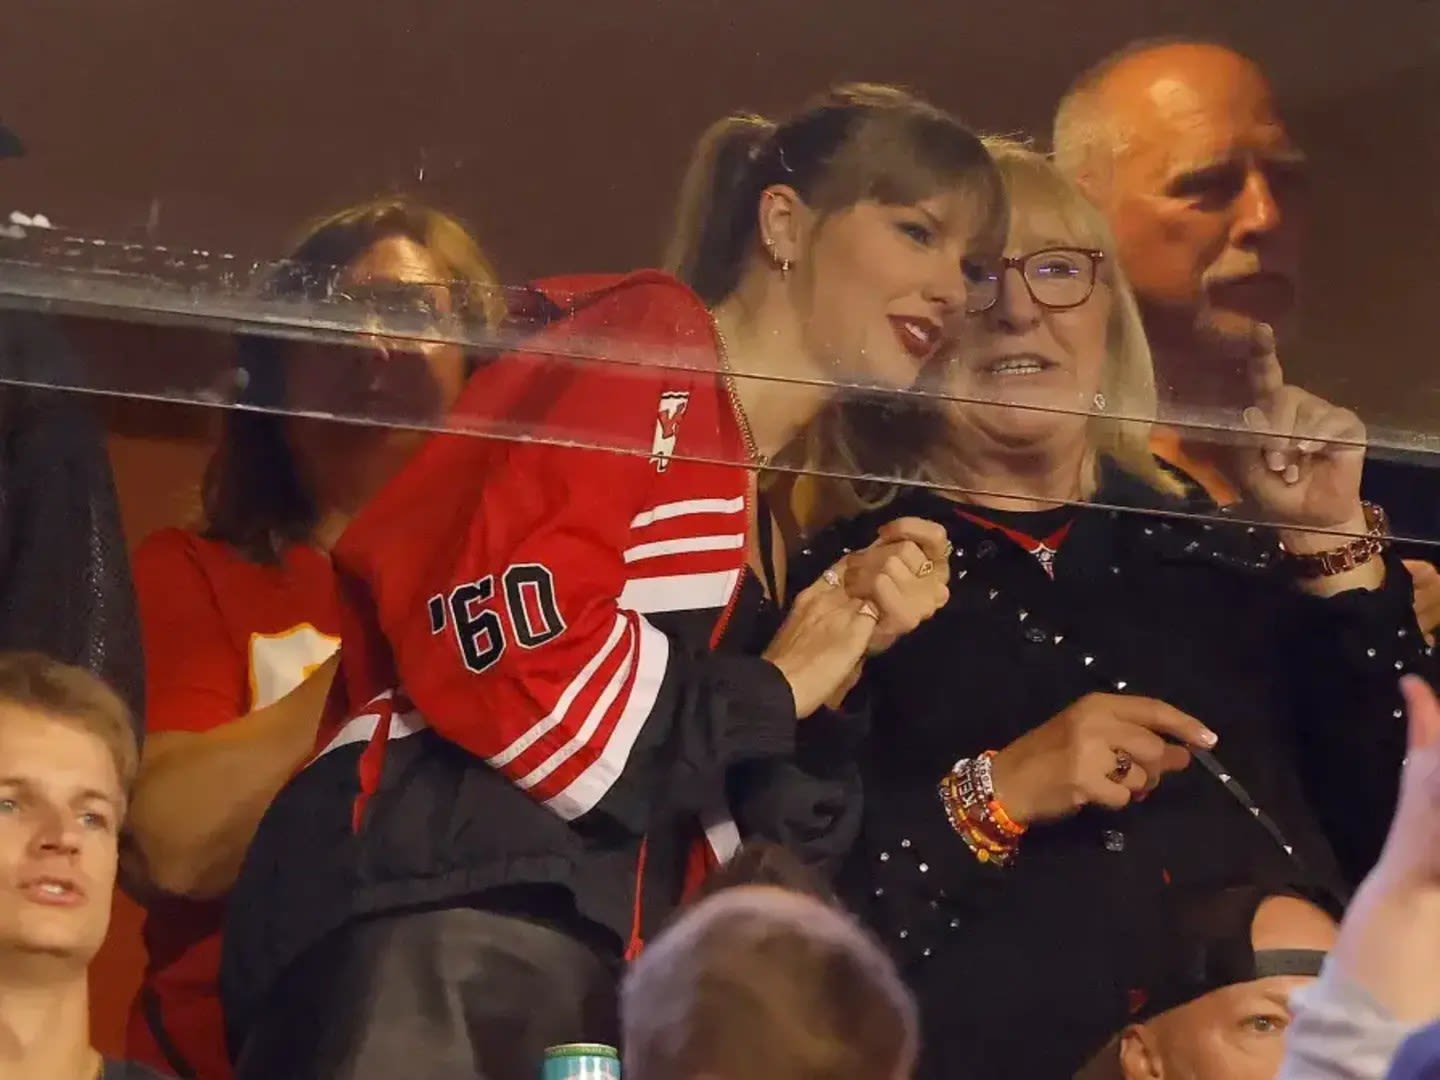 Travis Kelce’s Mom Has a Very Important Question To Ask Taylor Swift About Her New Album